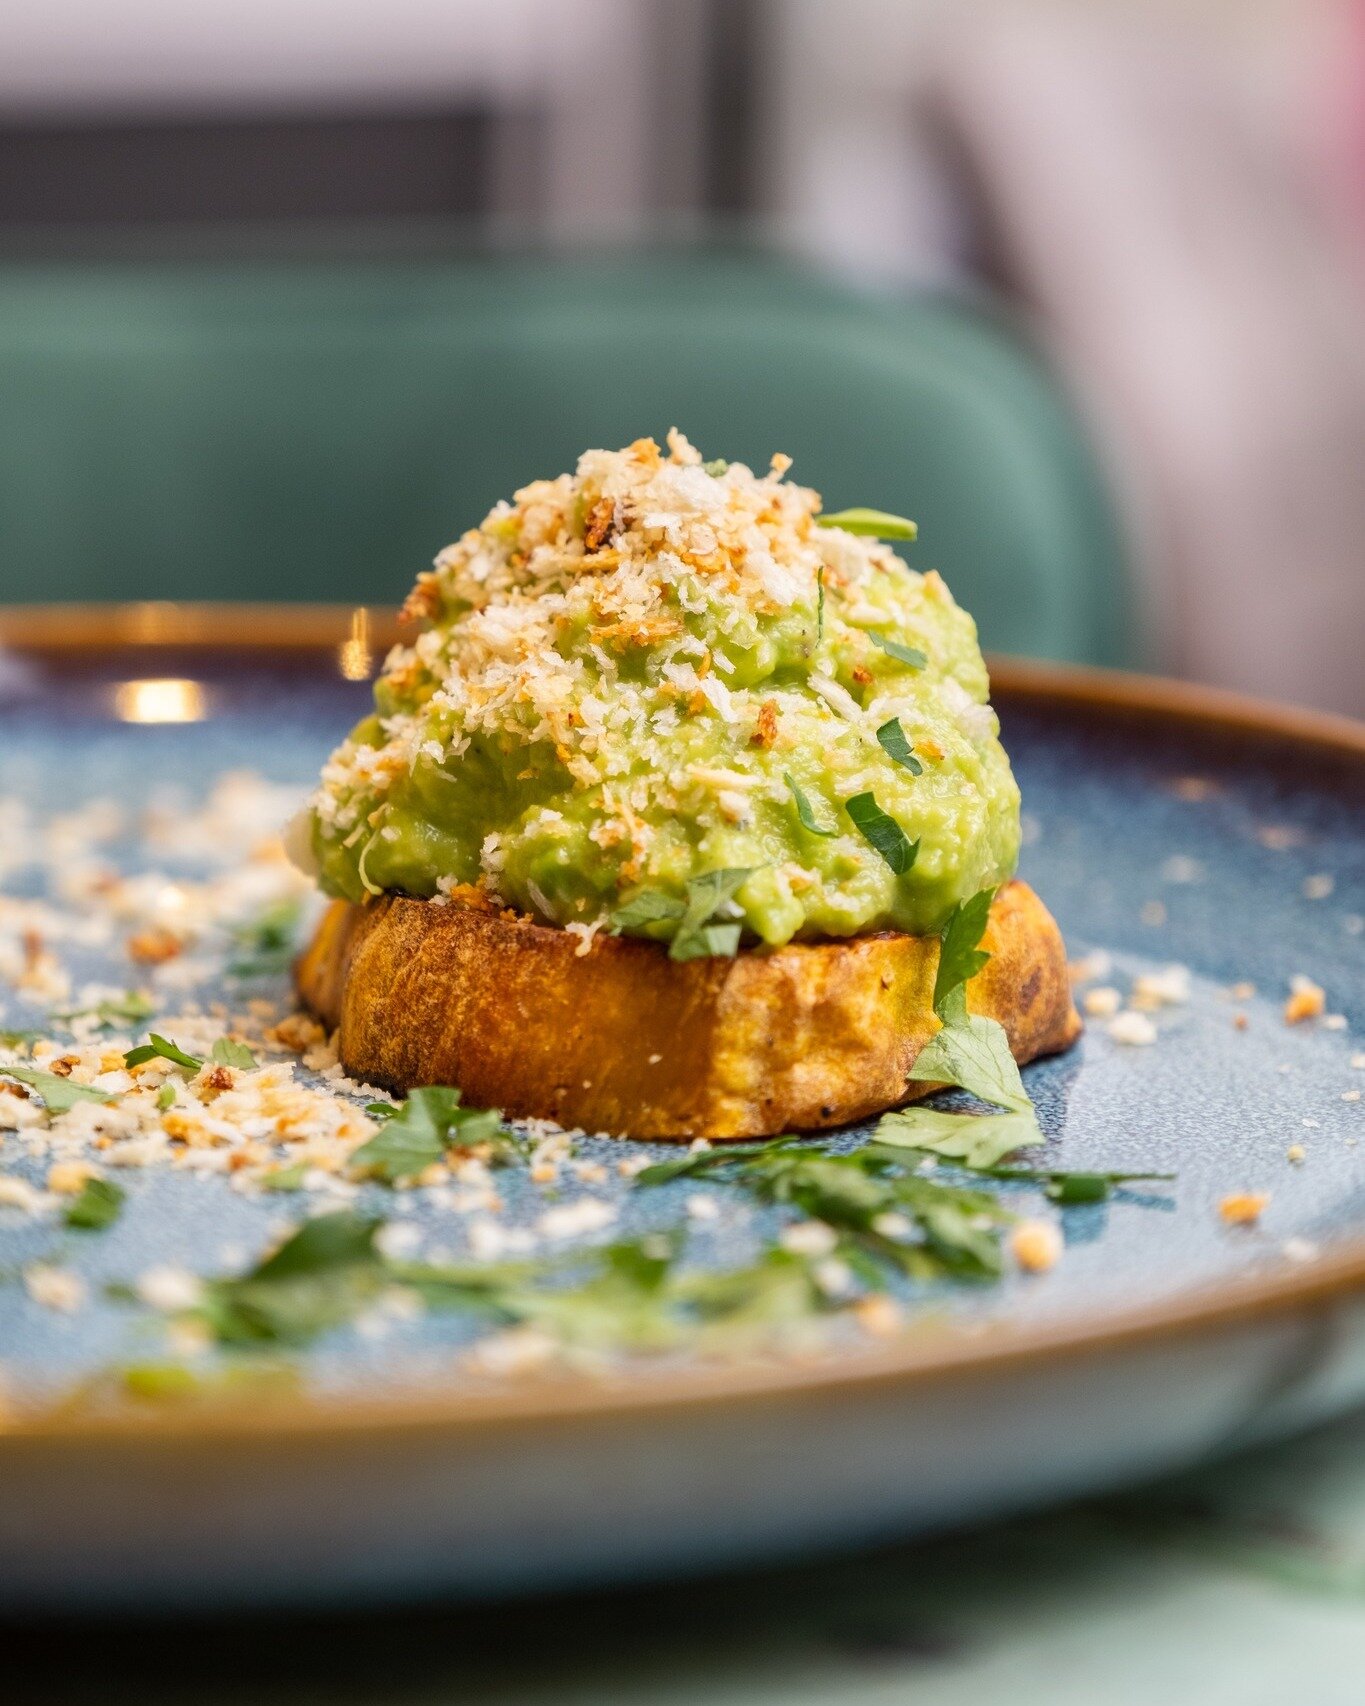 Whoever said sweet and savoury don't mix clearly hasn't tried this delicious combo of sweet potato, creamy avocado, and zesty cilantro! It's a match made in foodie heaven that will leave you craving more 😍

Visit us at Cristina&rsquo;s Barking📍

-
